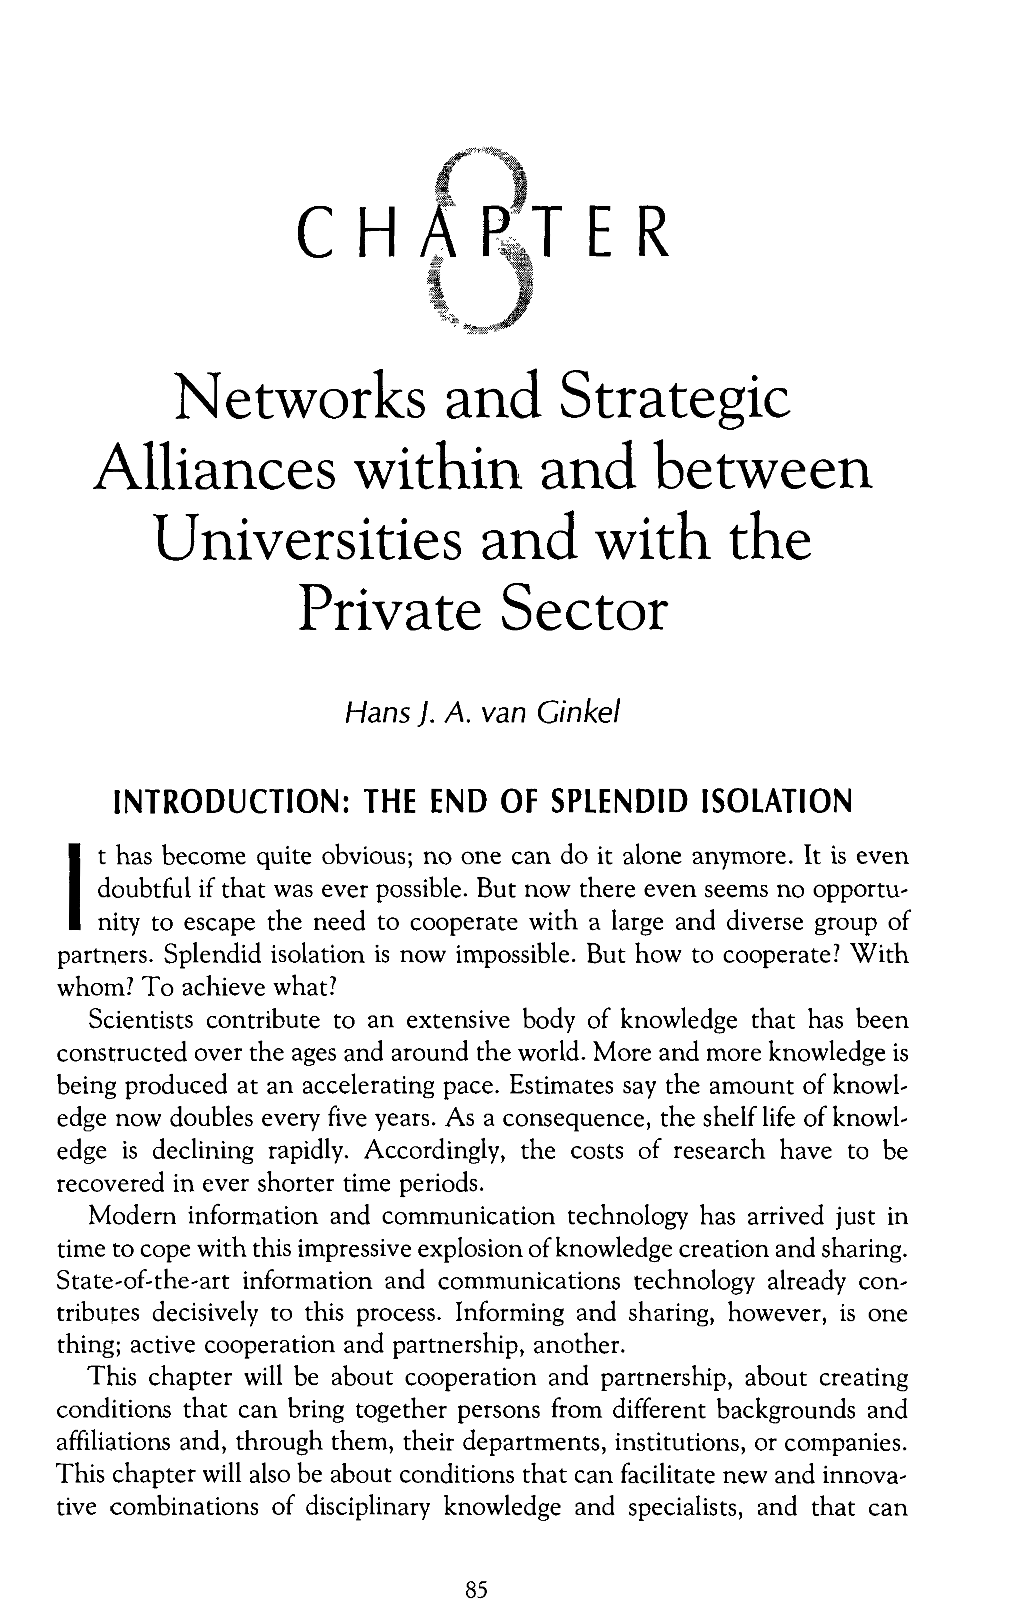 Networks and Strategic Alliances Within and Between Universities and with the Private Sector